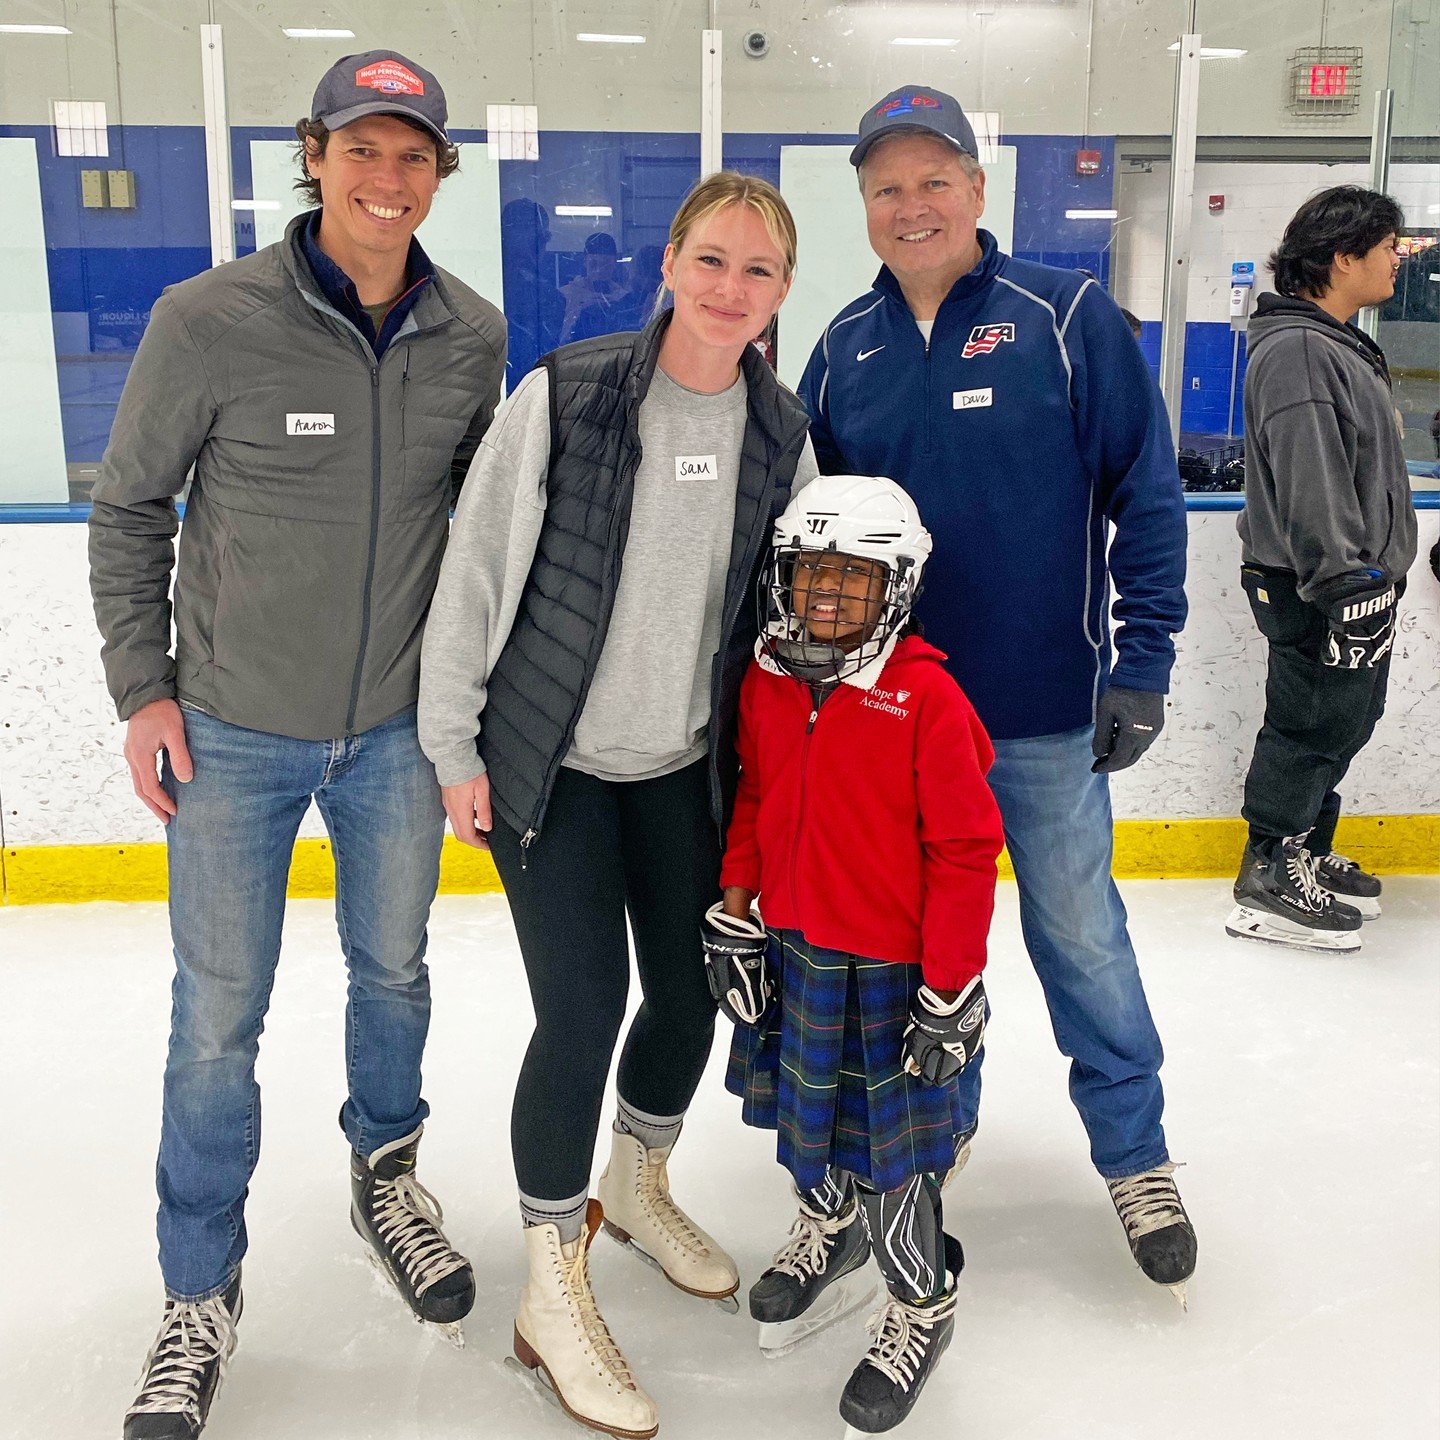 This week our team had the opportunity to help out with the @dinomights Learn 2 Skate program. This program teaches 1st graders to ice skate and connects with youth from their early elementary years through high school graduation. @touchpointmedia is